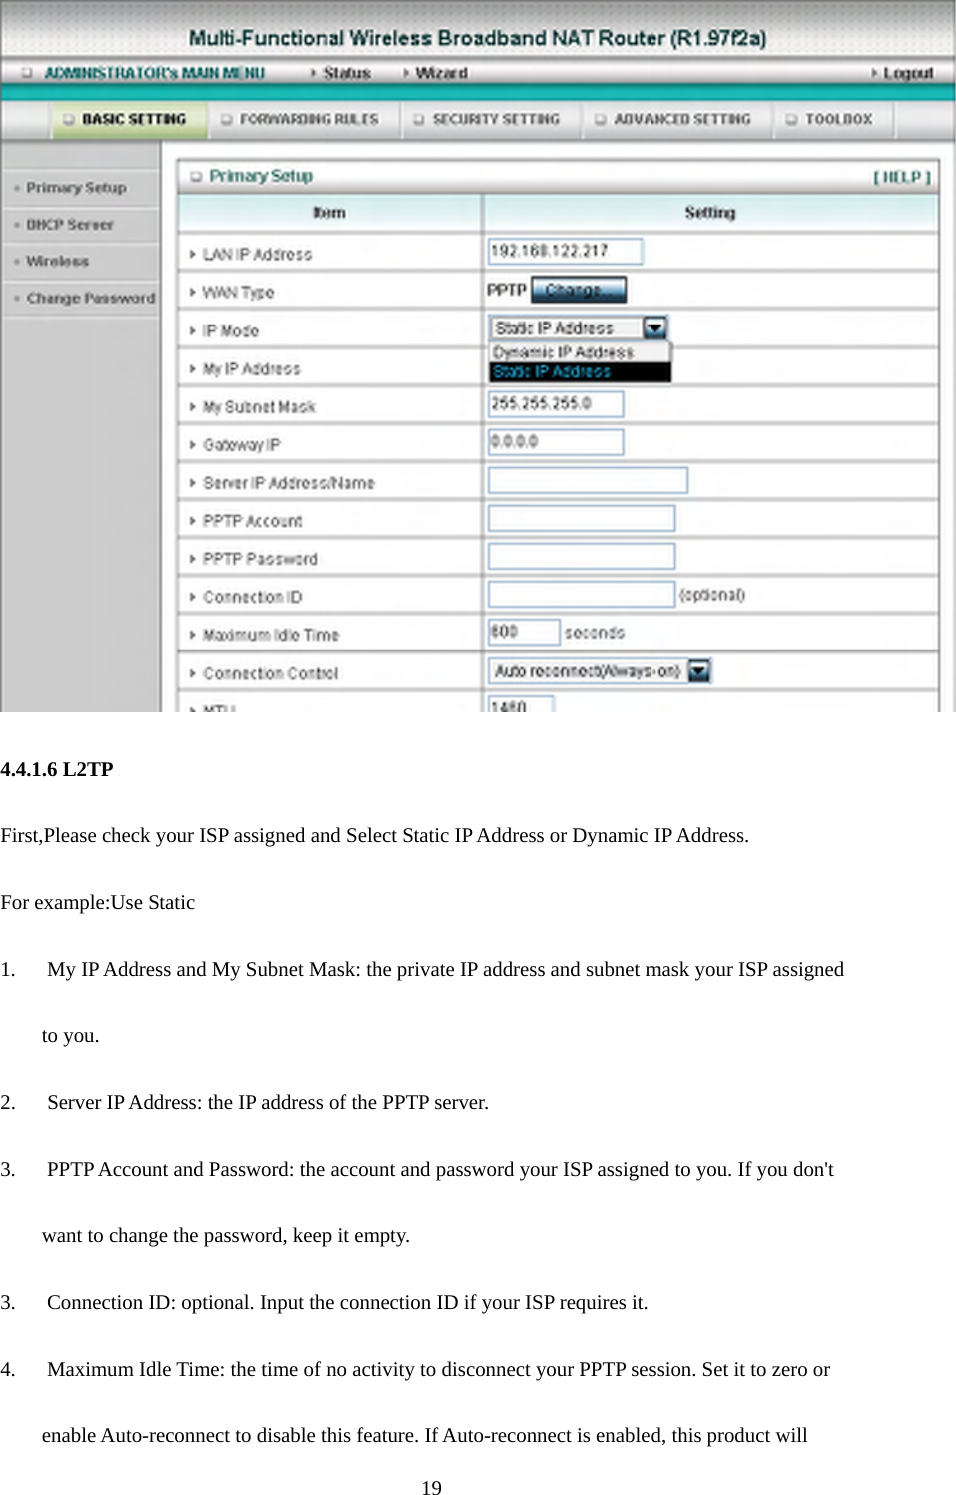   4.4.1.6 L2TP First,Please check your ISP assigned and Select Static IP Address or Dynamic IP Address. For example:Use Static 1.      My IP Address and My Subnet Mask: the private IP address and subnet mask your ISP assigned   to you.   2.    Server IP Address: the IP address of the PPTP server.   3.      PPTP Account and Password: the account and password your ISP assigned to you. If you don&apos;t want to change the password, keep it empty.   3.      Connection ID: optional. Input the connection ID if your ISP requires it.   4.      Maximum Idle Time: the time of no activity to disconnect your PPTP session. Set it to zero or   enable Auto-reconnect to disable this feature. If Auto-reconnect is enabled, this product will    19